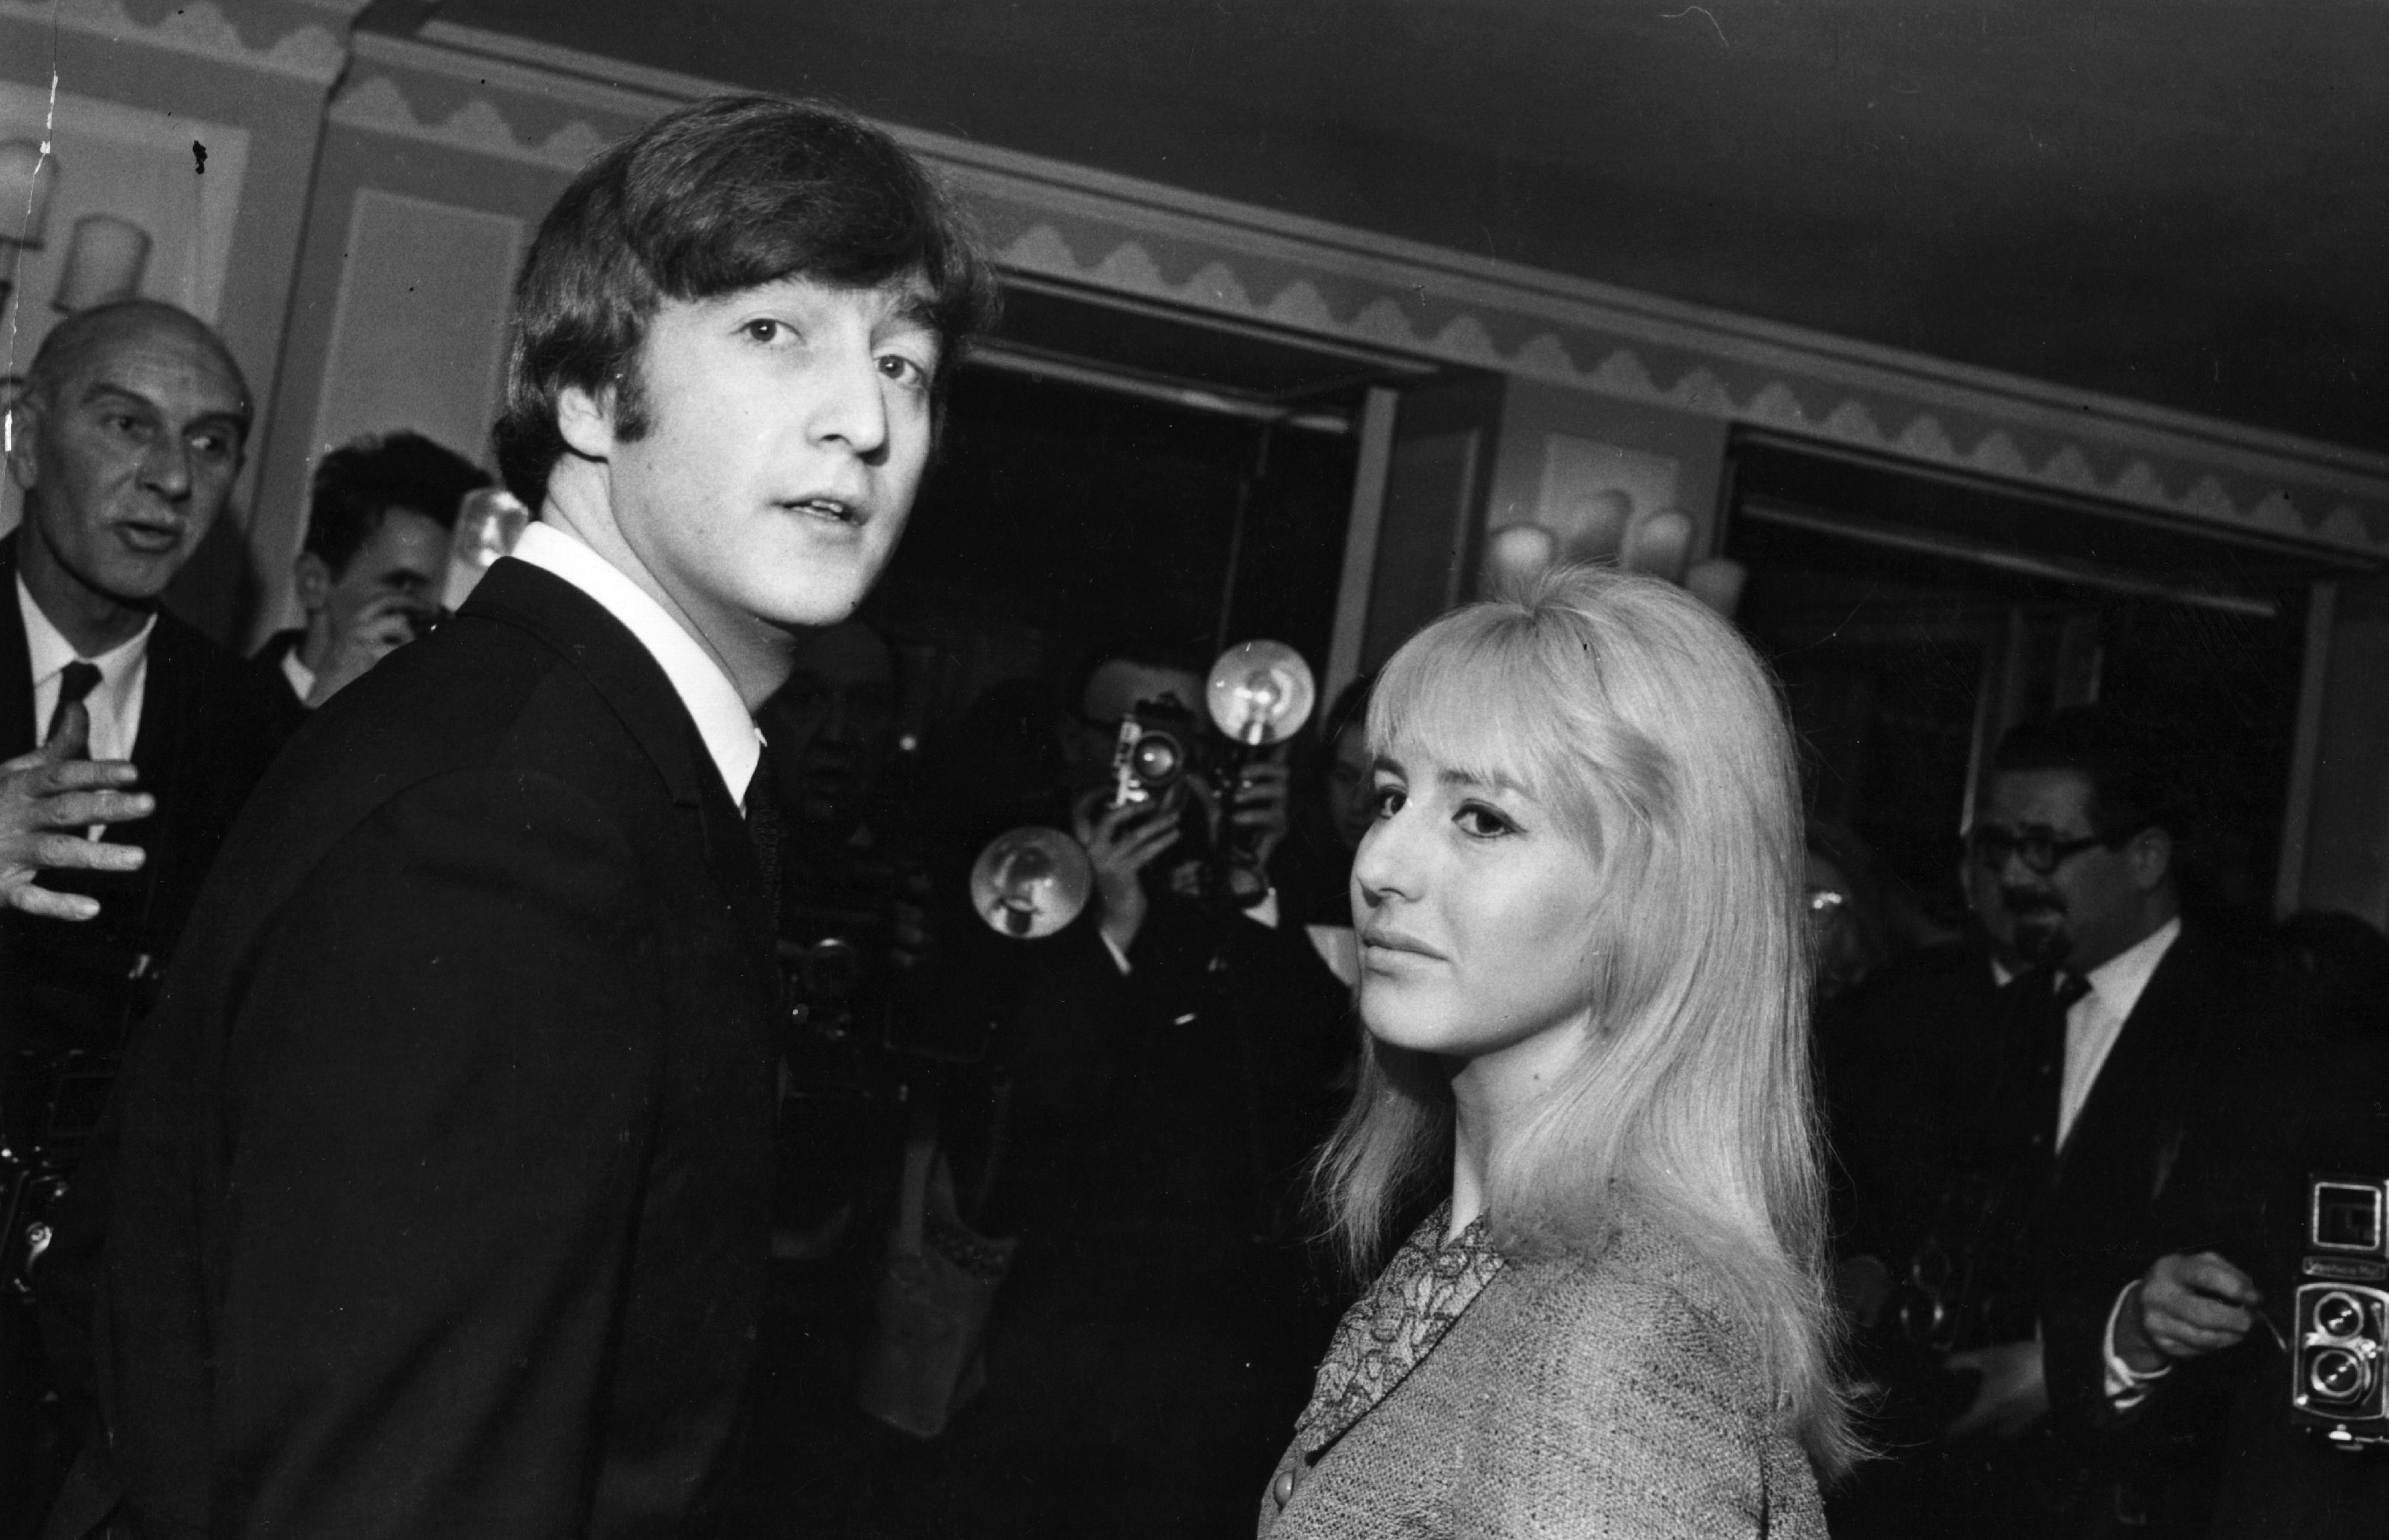 Singer-songwriter John Lennon (1940 - 1980) of The Beatles, with his wife Cynthia at the Dorchester Hotel, London